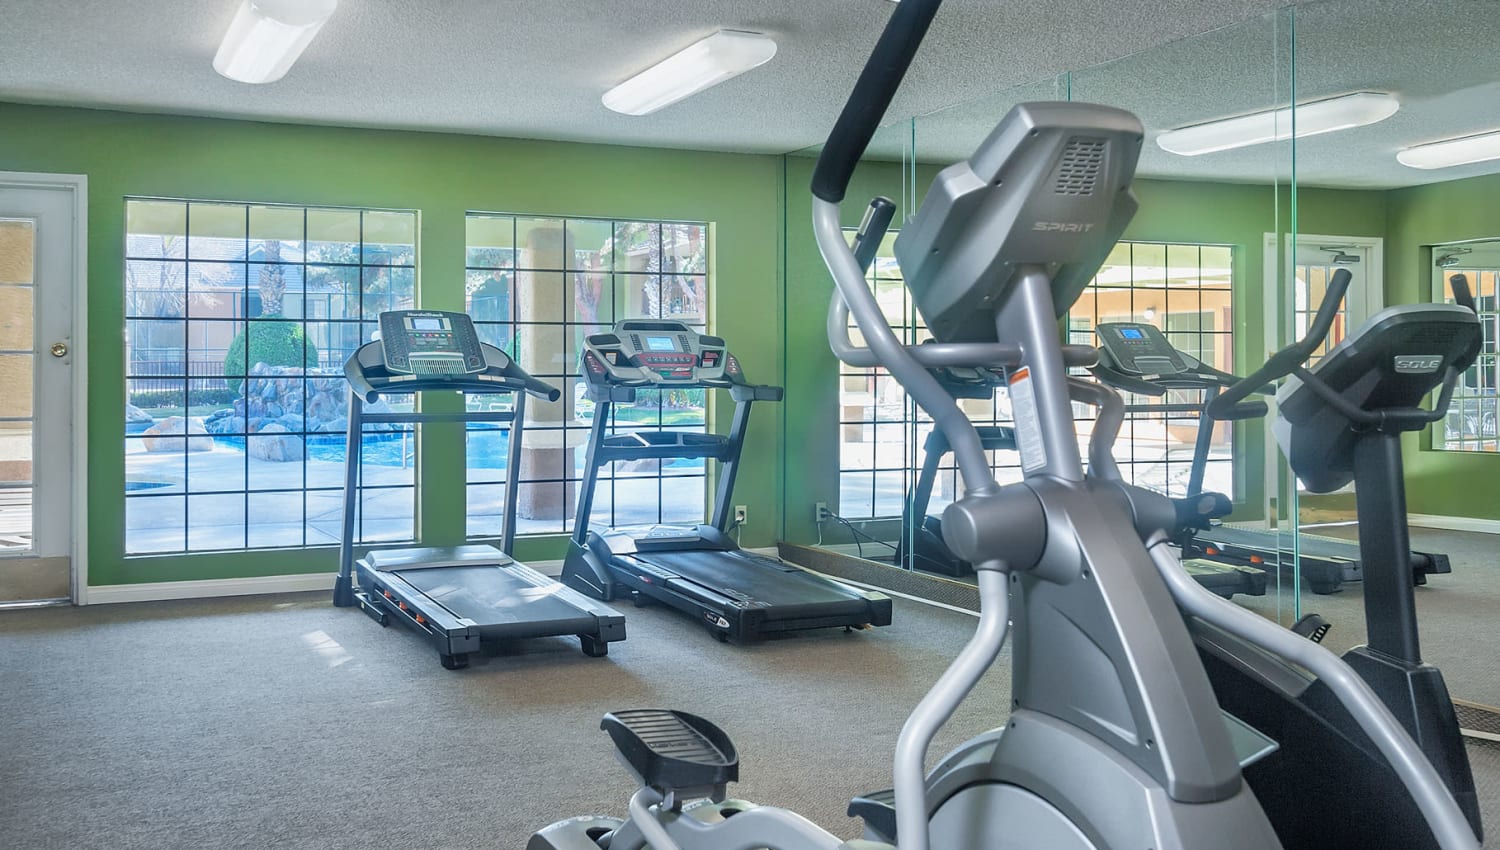 Cardio equipment and more in the onsite fitness center at Shelter Cove Apartments in Las Vegas, Nevada